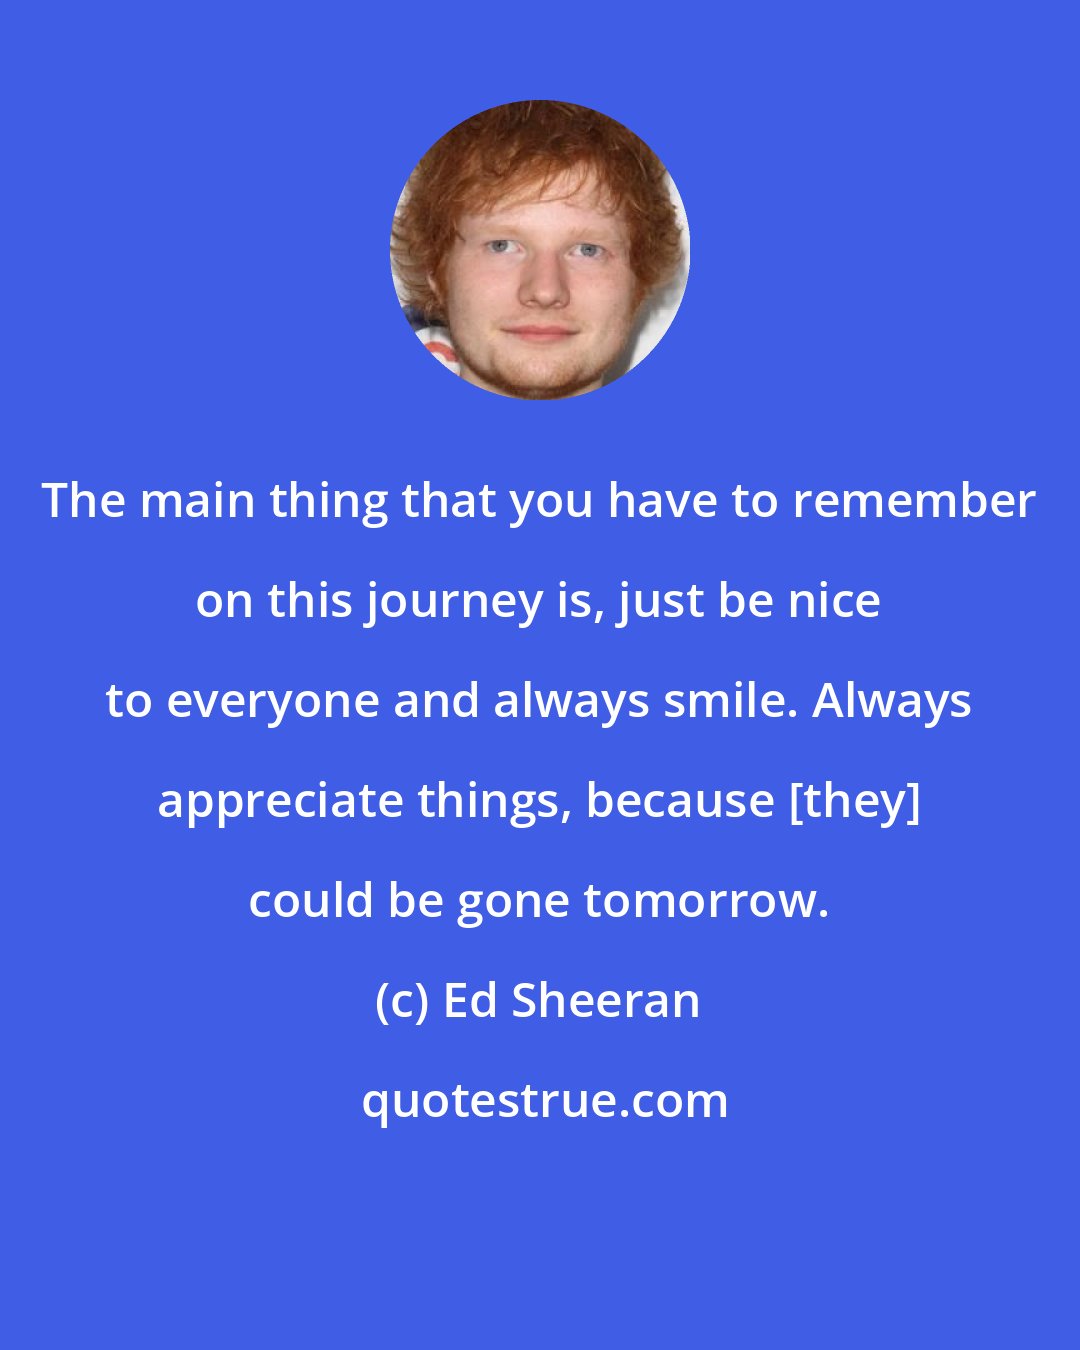 Ed Sheeran: The main thing that you have to remember on this journey is, just be nice to everyone and always smile. Always appreciate things, because [they] could be gone tomorrow.